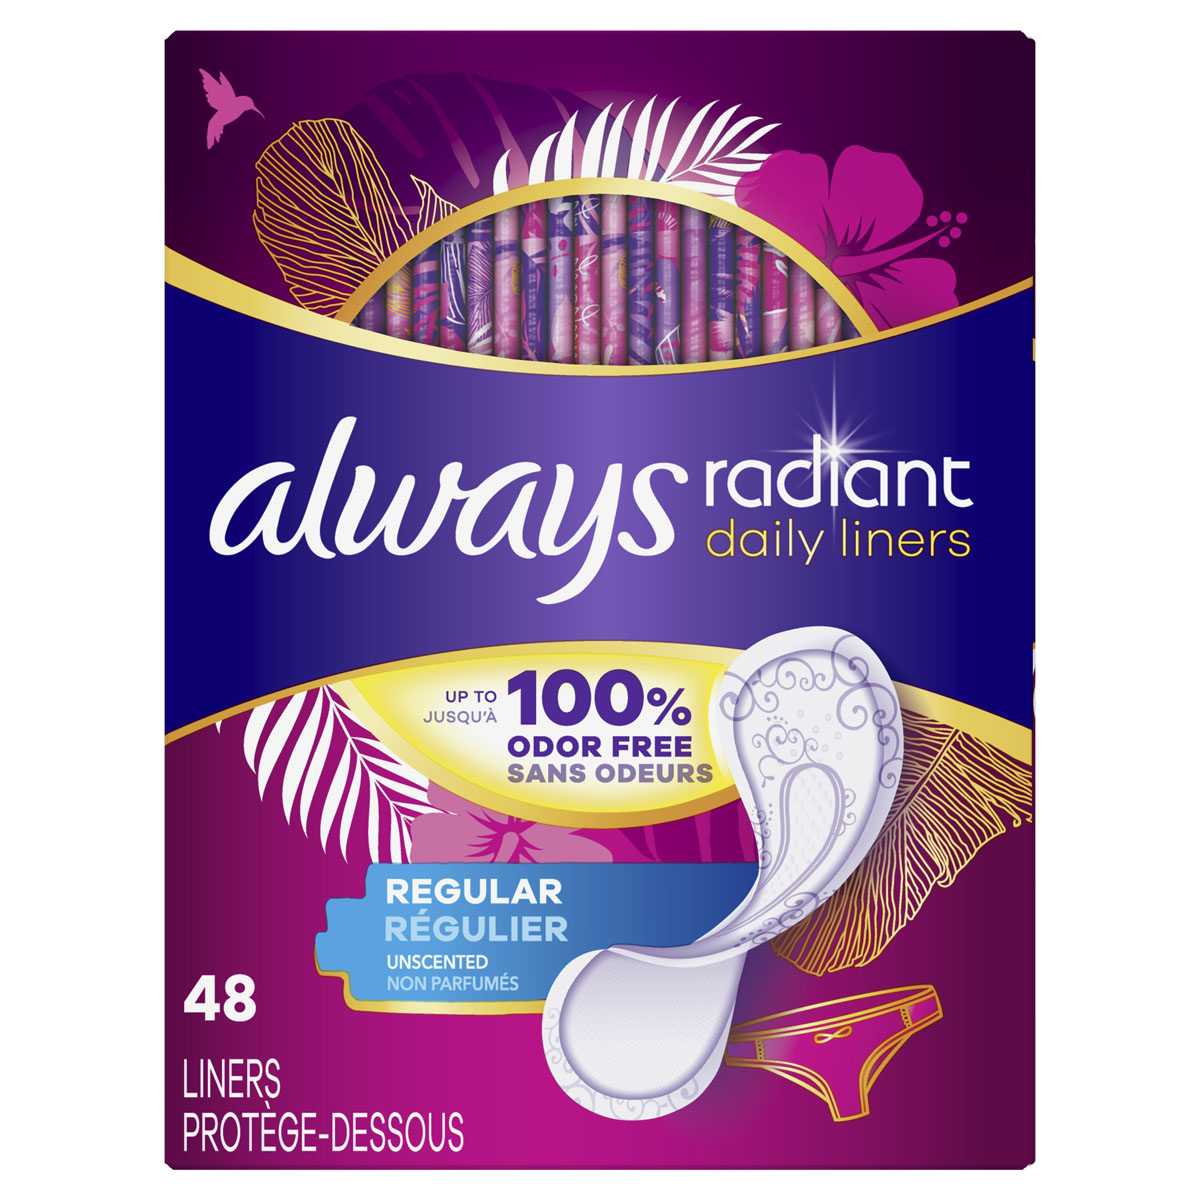 Product-Always Radiant Daily Liners, Regular, Wrapped